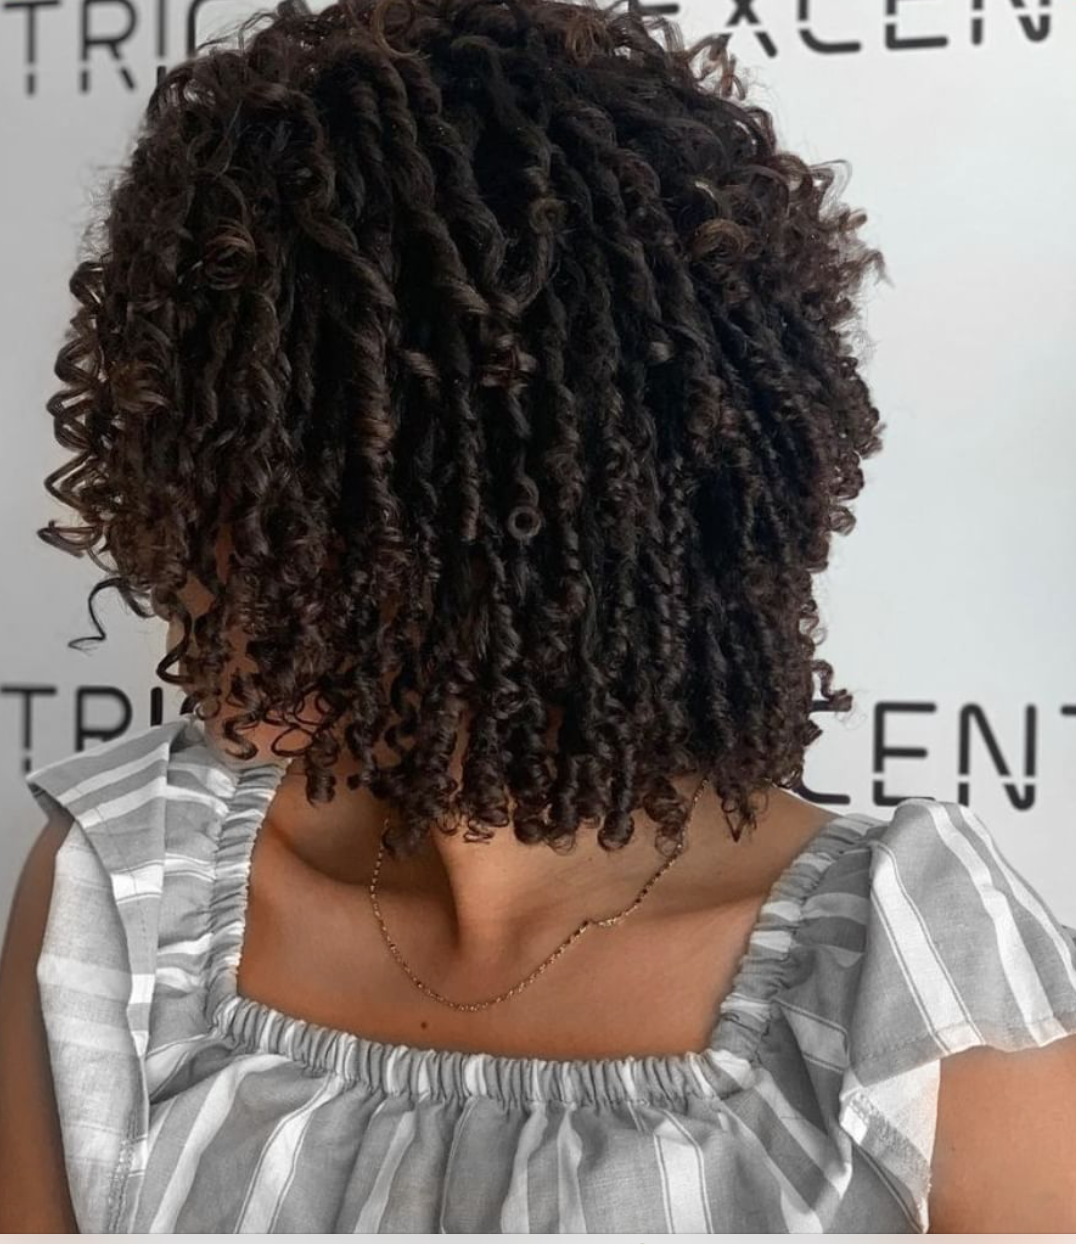 The side view of a woman with curly short black hair.